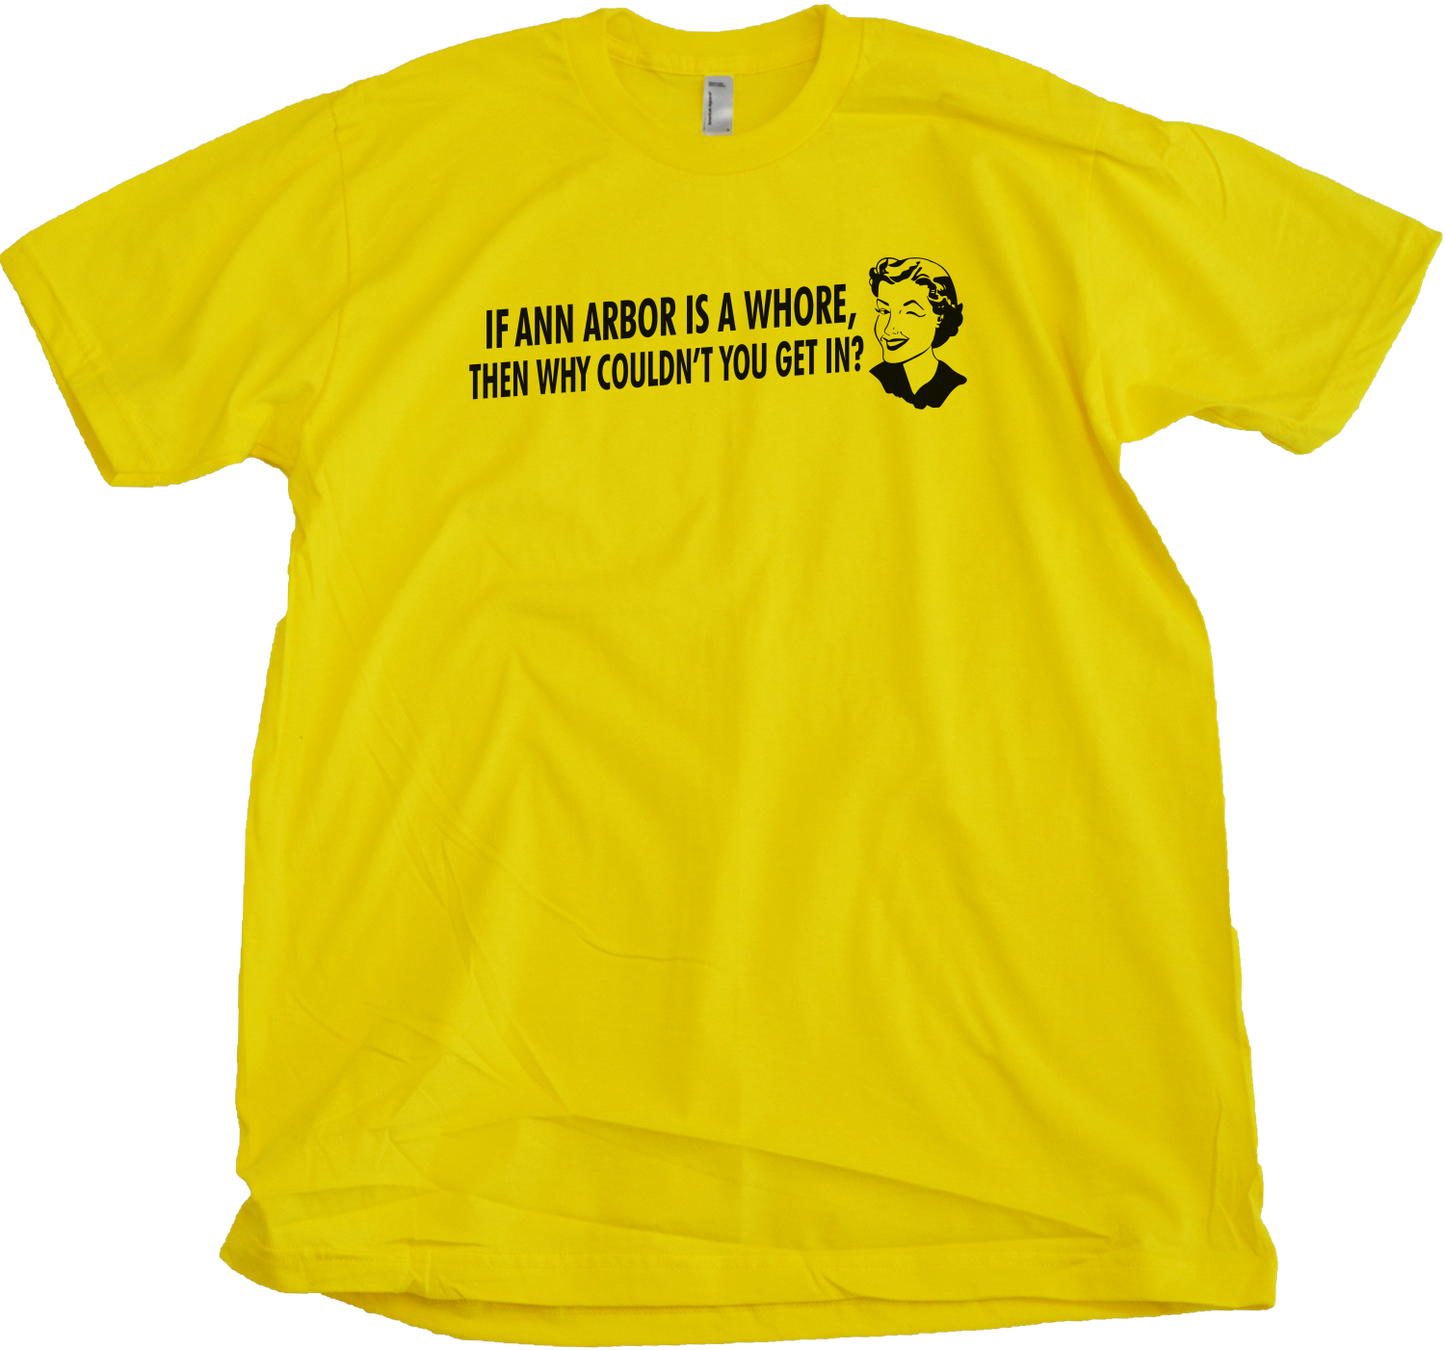 Standard Yellow If Ann Arbor Is A Whore, Why Couldn't You Get In? - Football Fan T-shirt